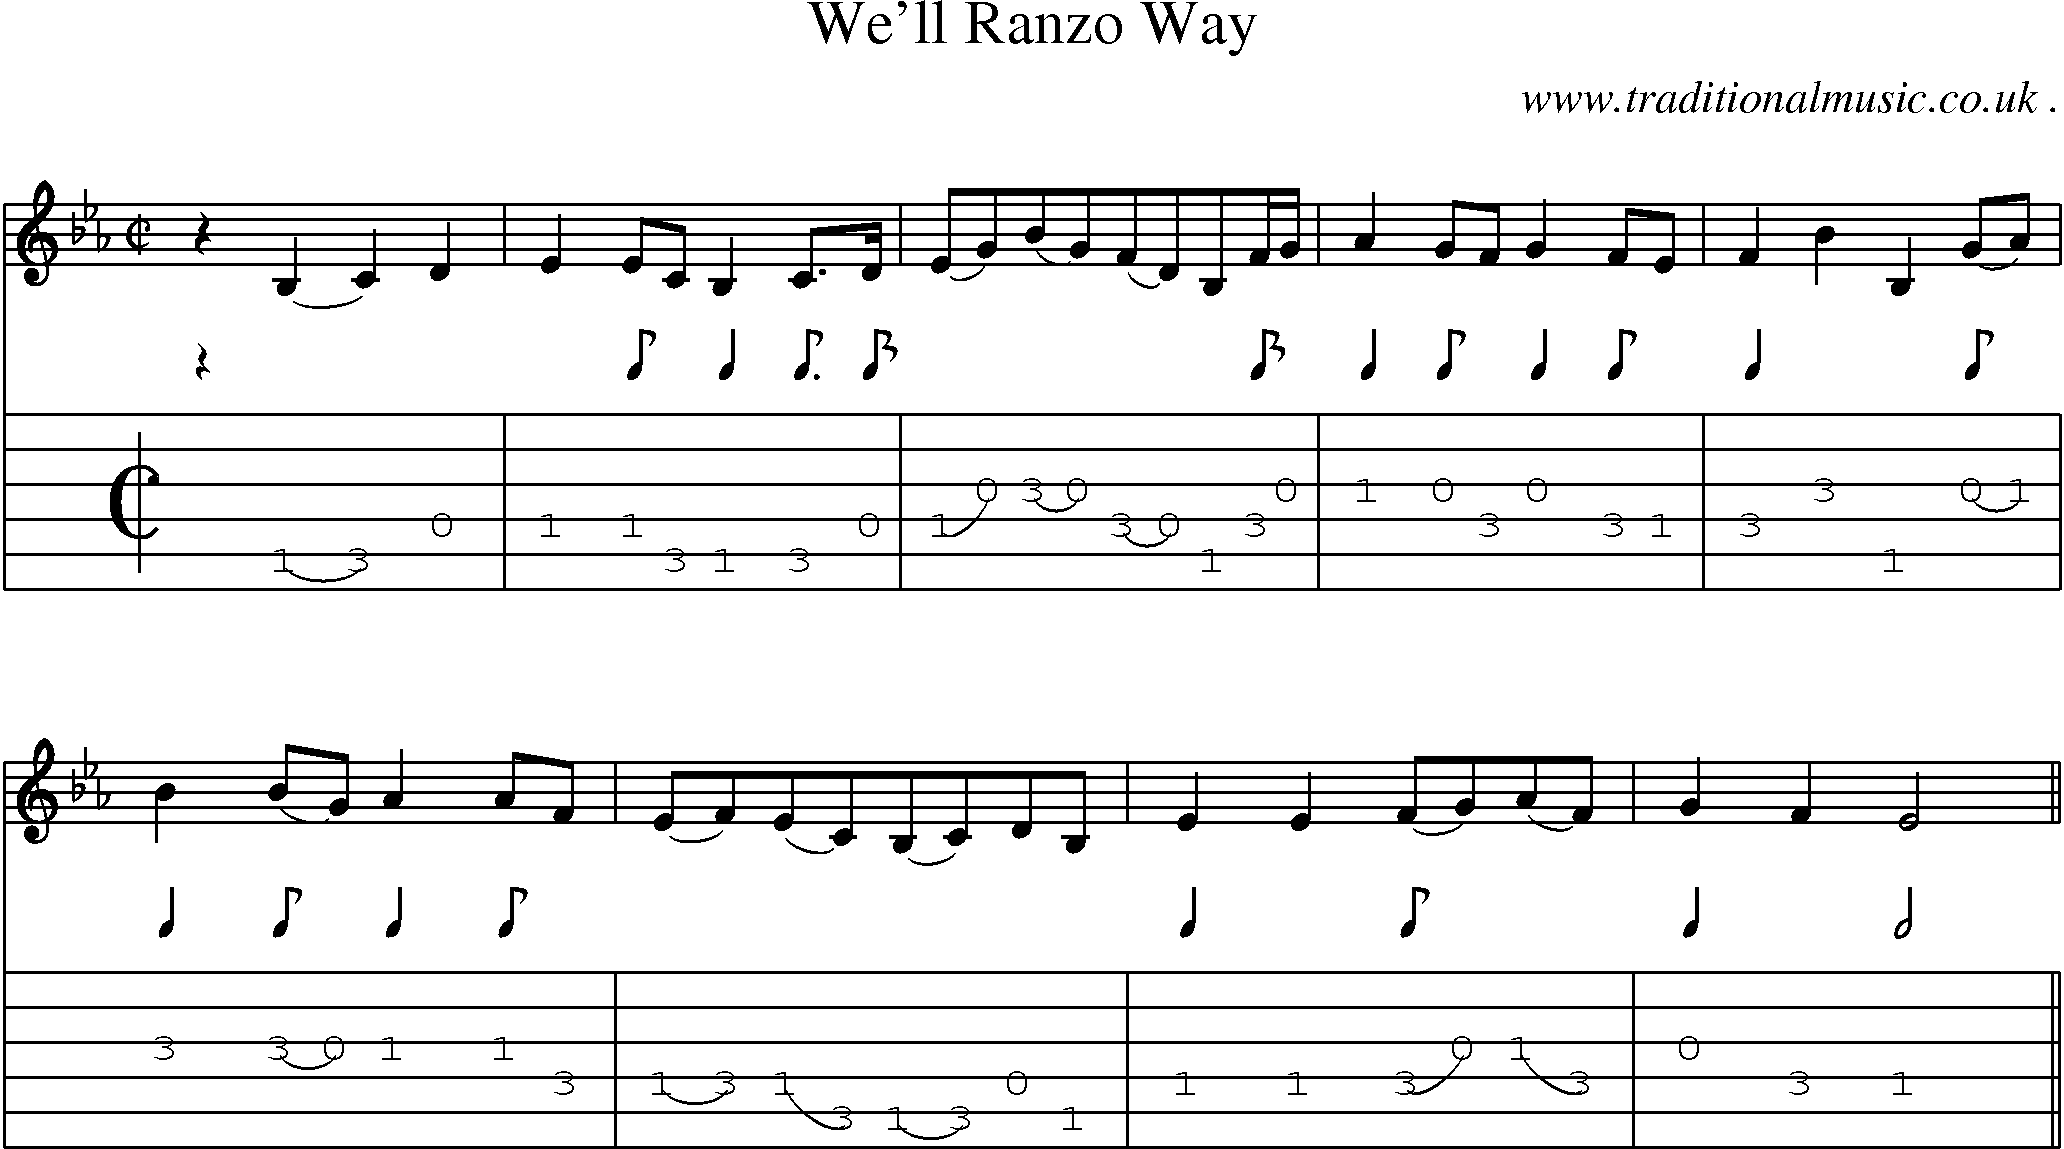 Sheet-Music and Guitar Tabs for Well Ranzo Way